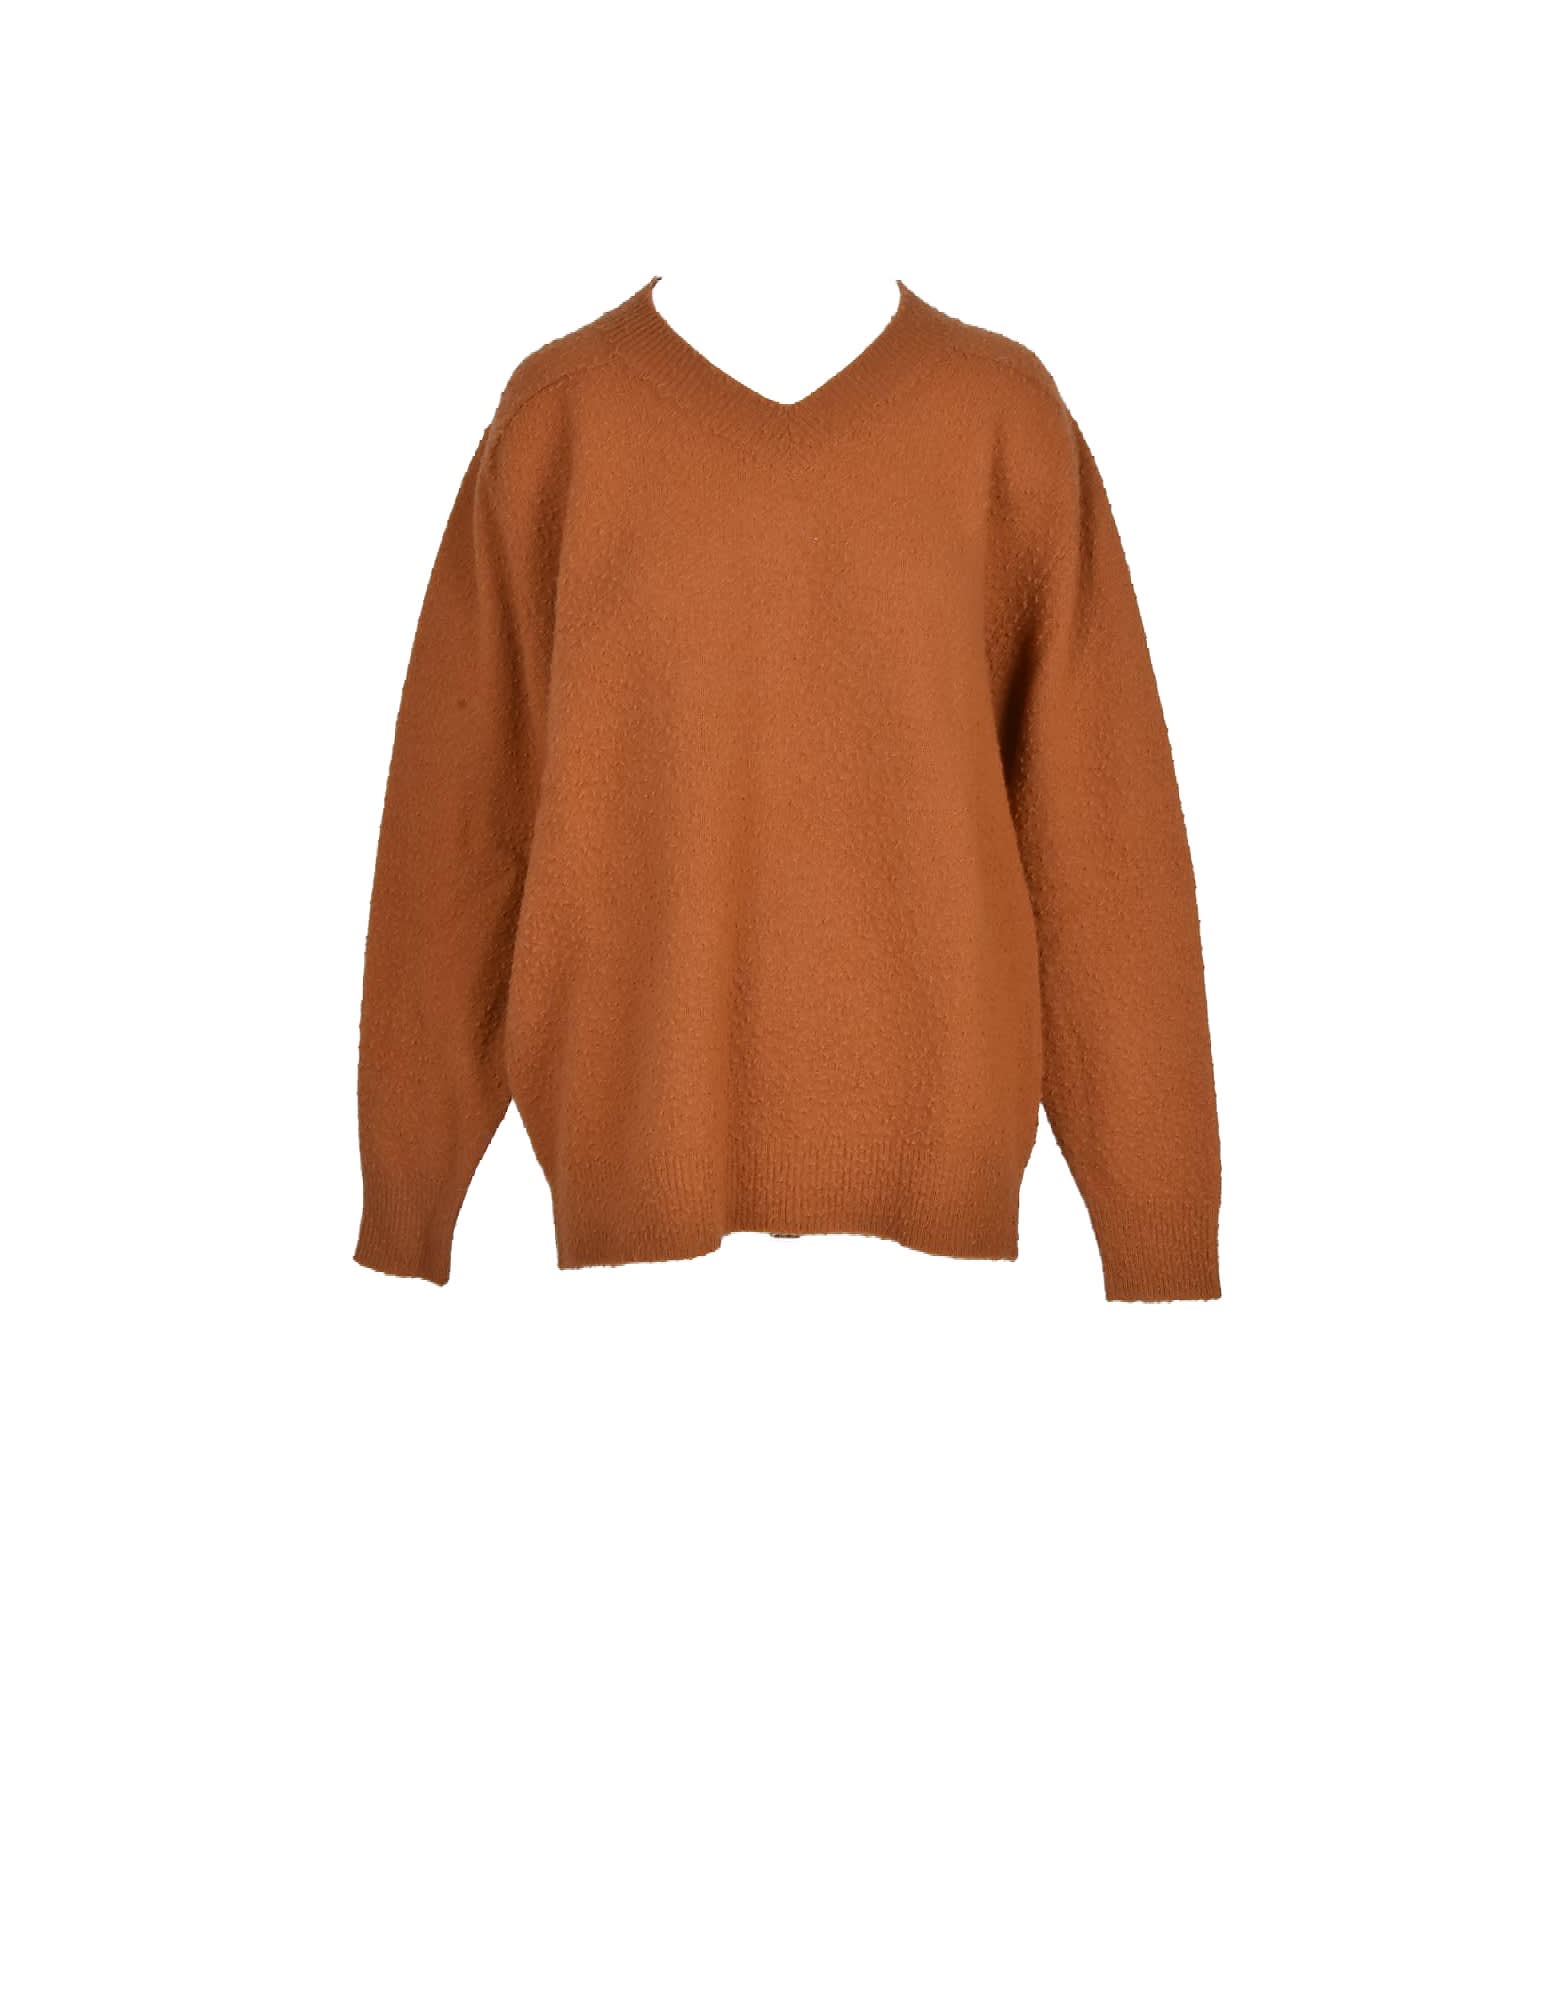 Mauro Grifoni Womens Brown Sweater